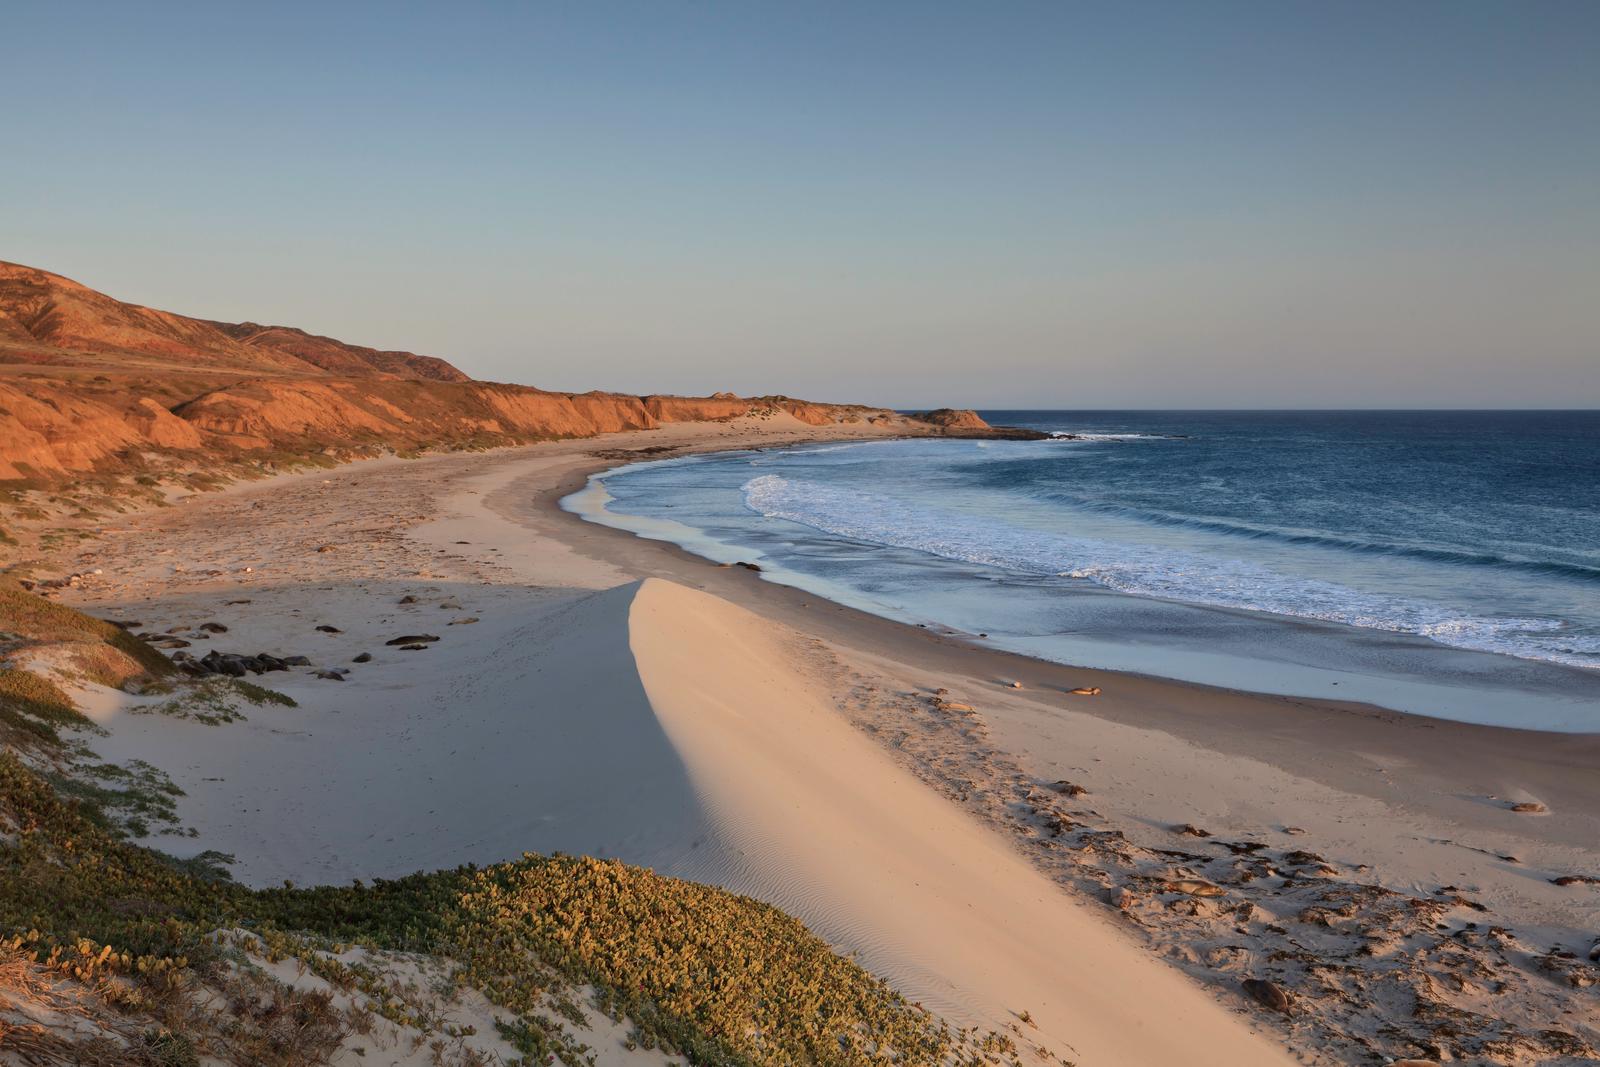 Sandy beach with dunes, ocean and small waves and steep coastal bluffs covered in dry grass.  